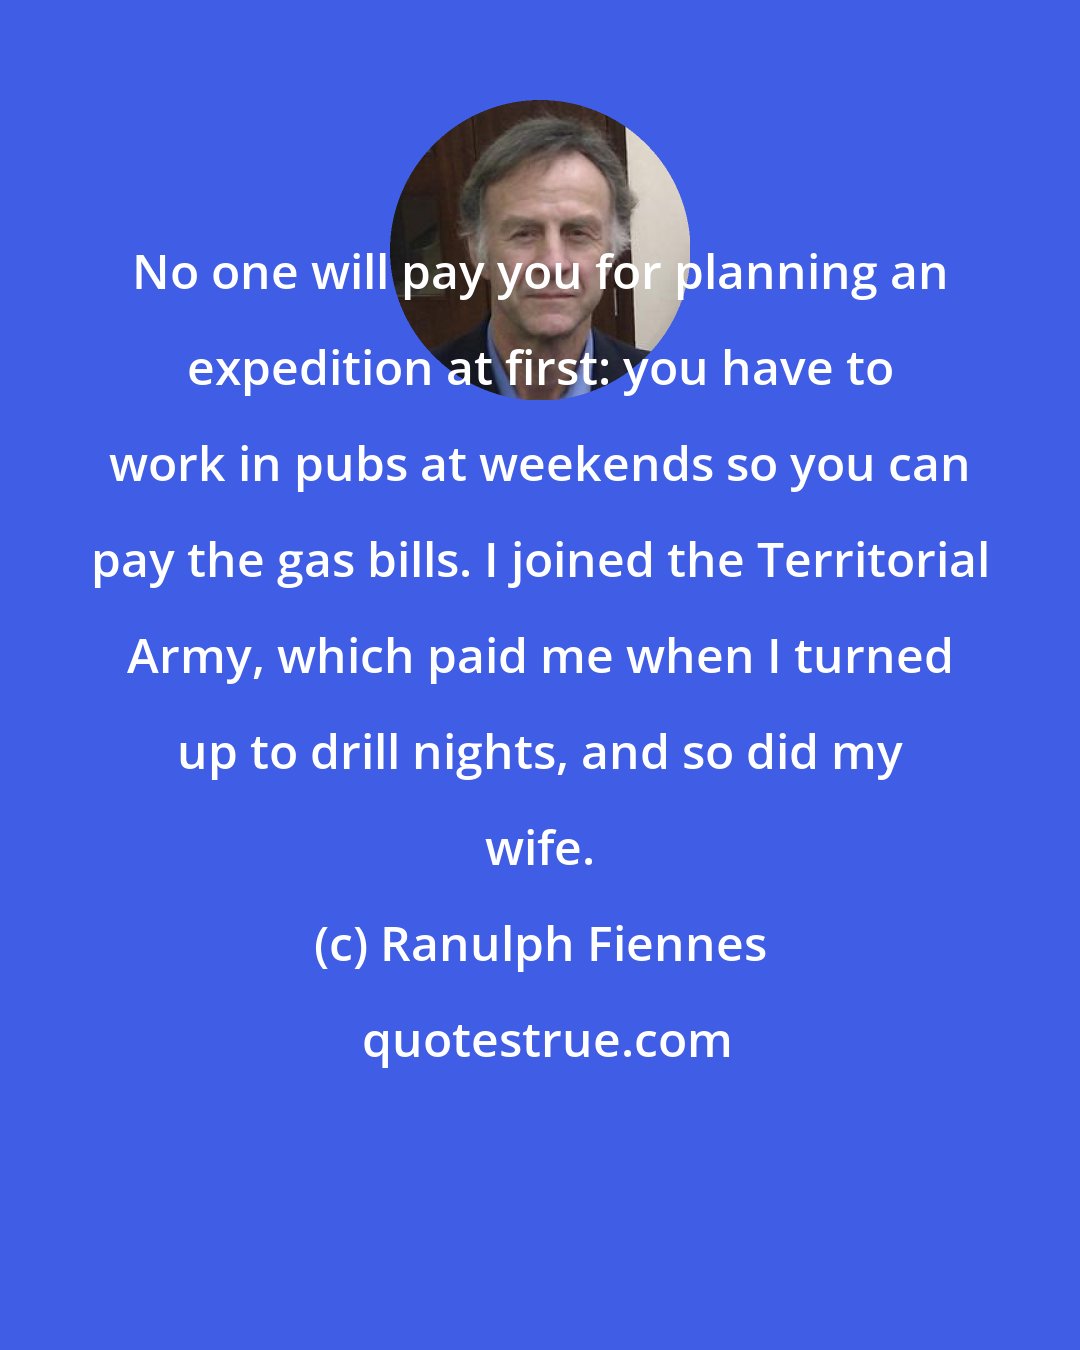 Ranulph Fiennes: No one will pay you for planning an expedition at first: you have to work in pubs at weekends so you can pay the gas bills. I joined the Territorial Army, which paid me when I turned up to drill nights, and so did my wife.